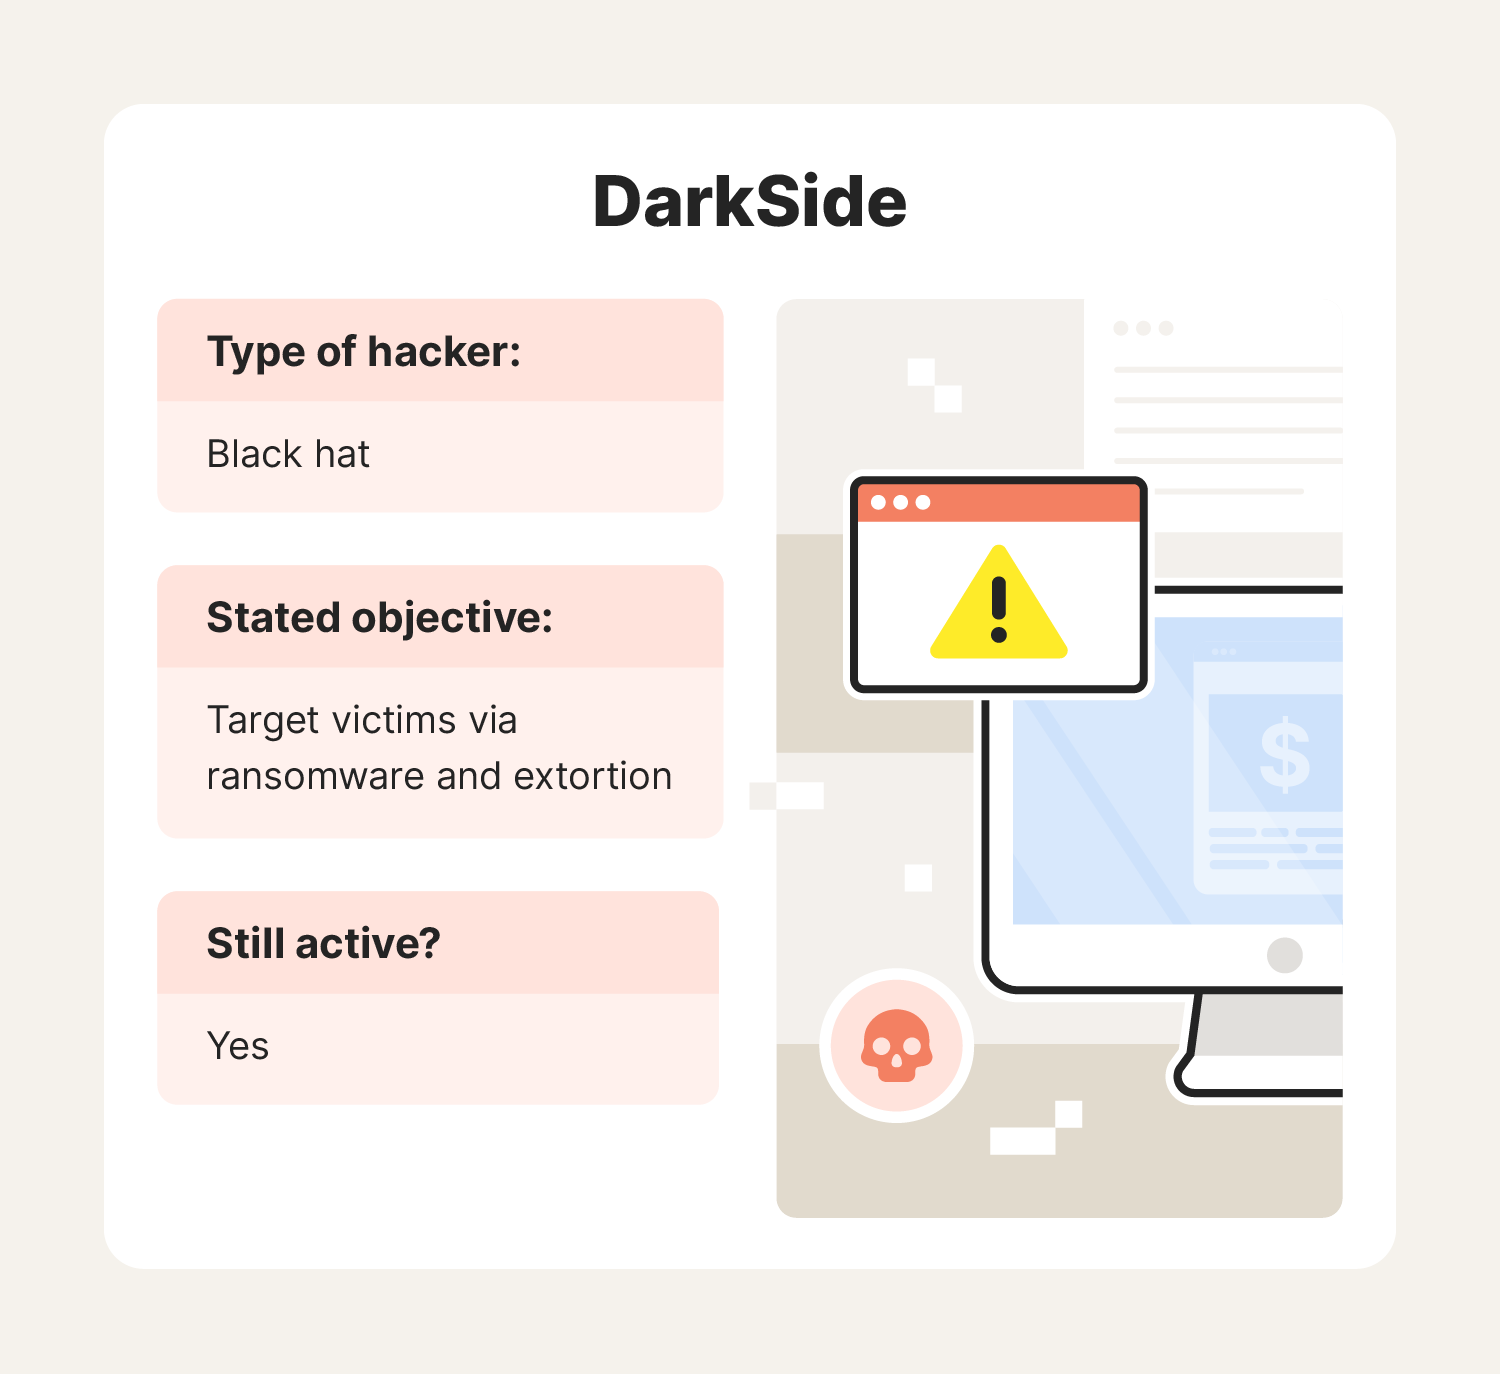 A graphic goes over specific examples of hacker groups, including DarkSide.